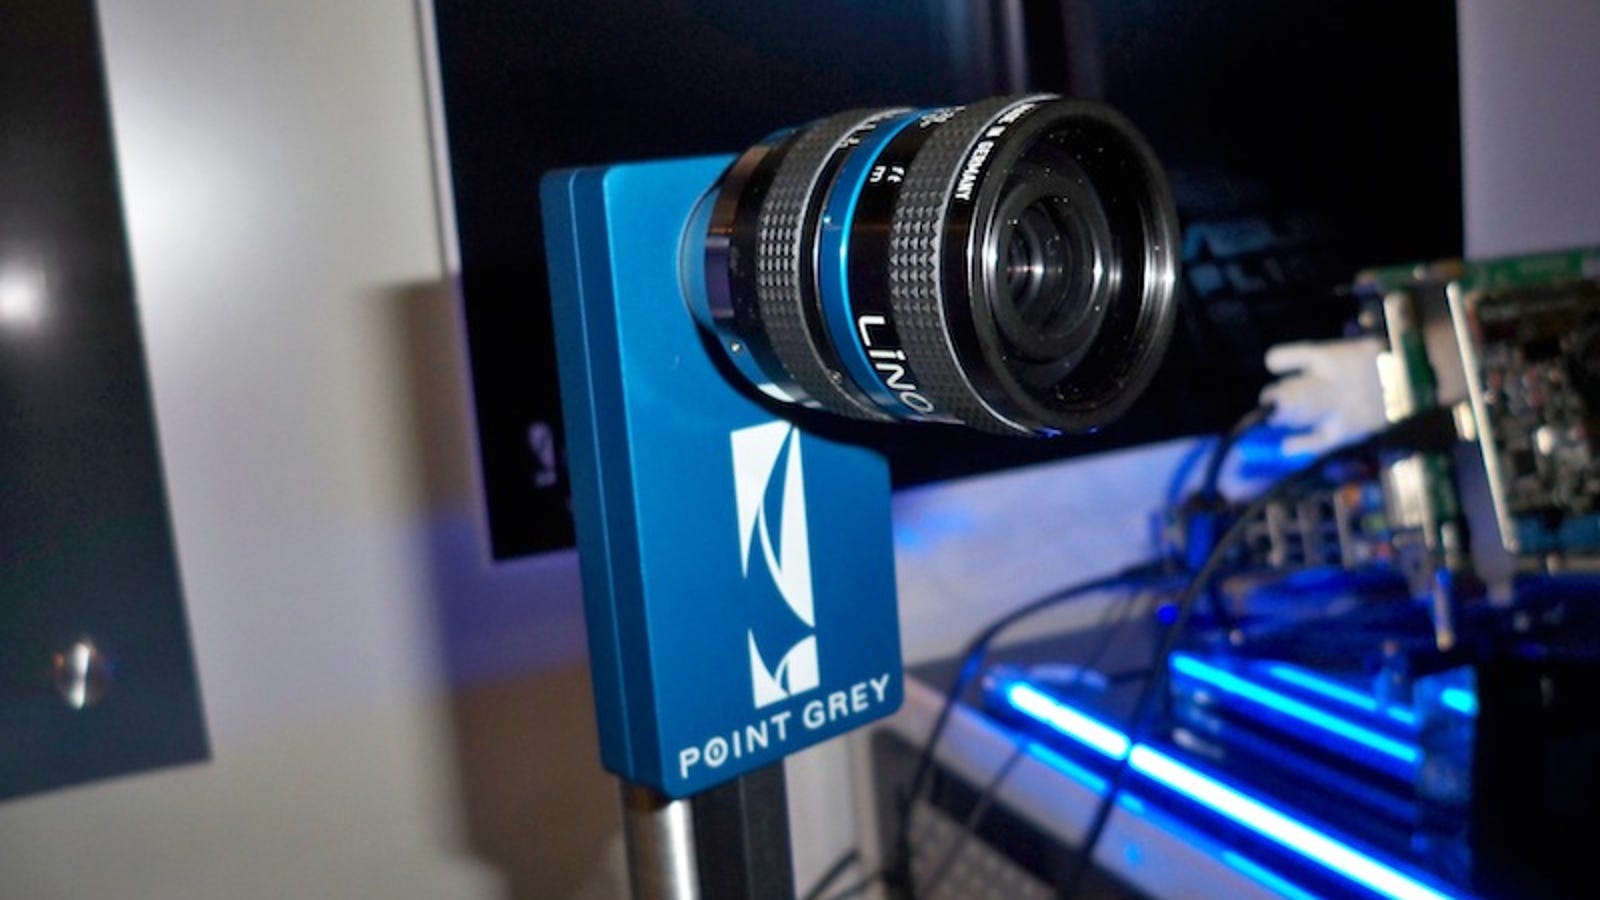 World S First Usb 3 0 Webcam Streams Uncompressed 1080p Video